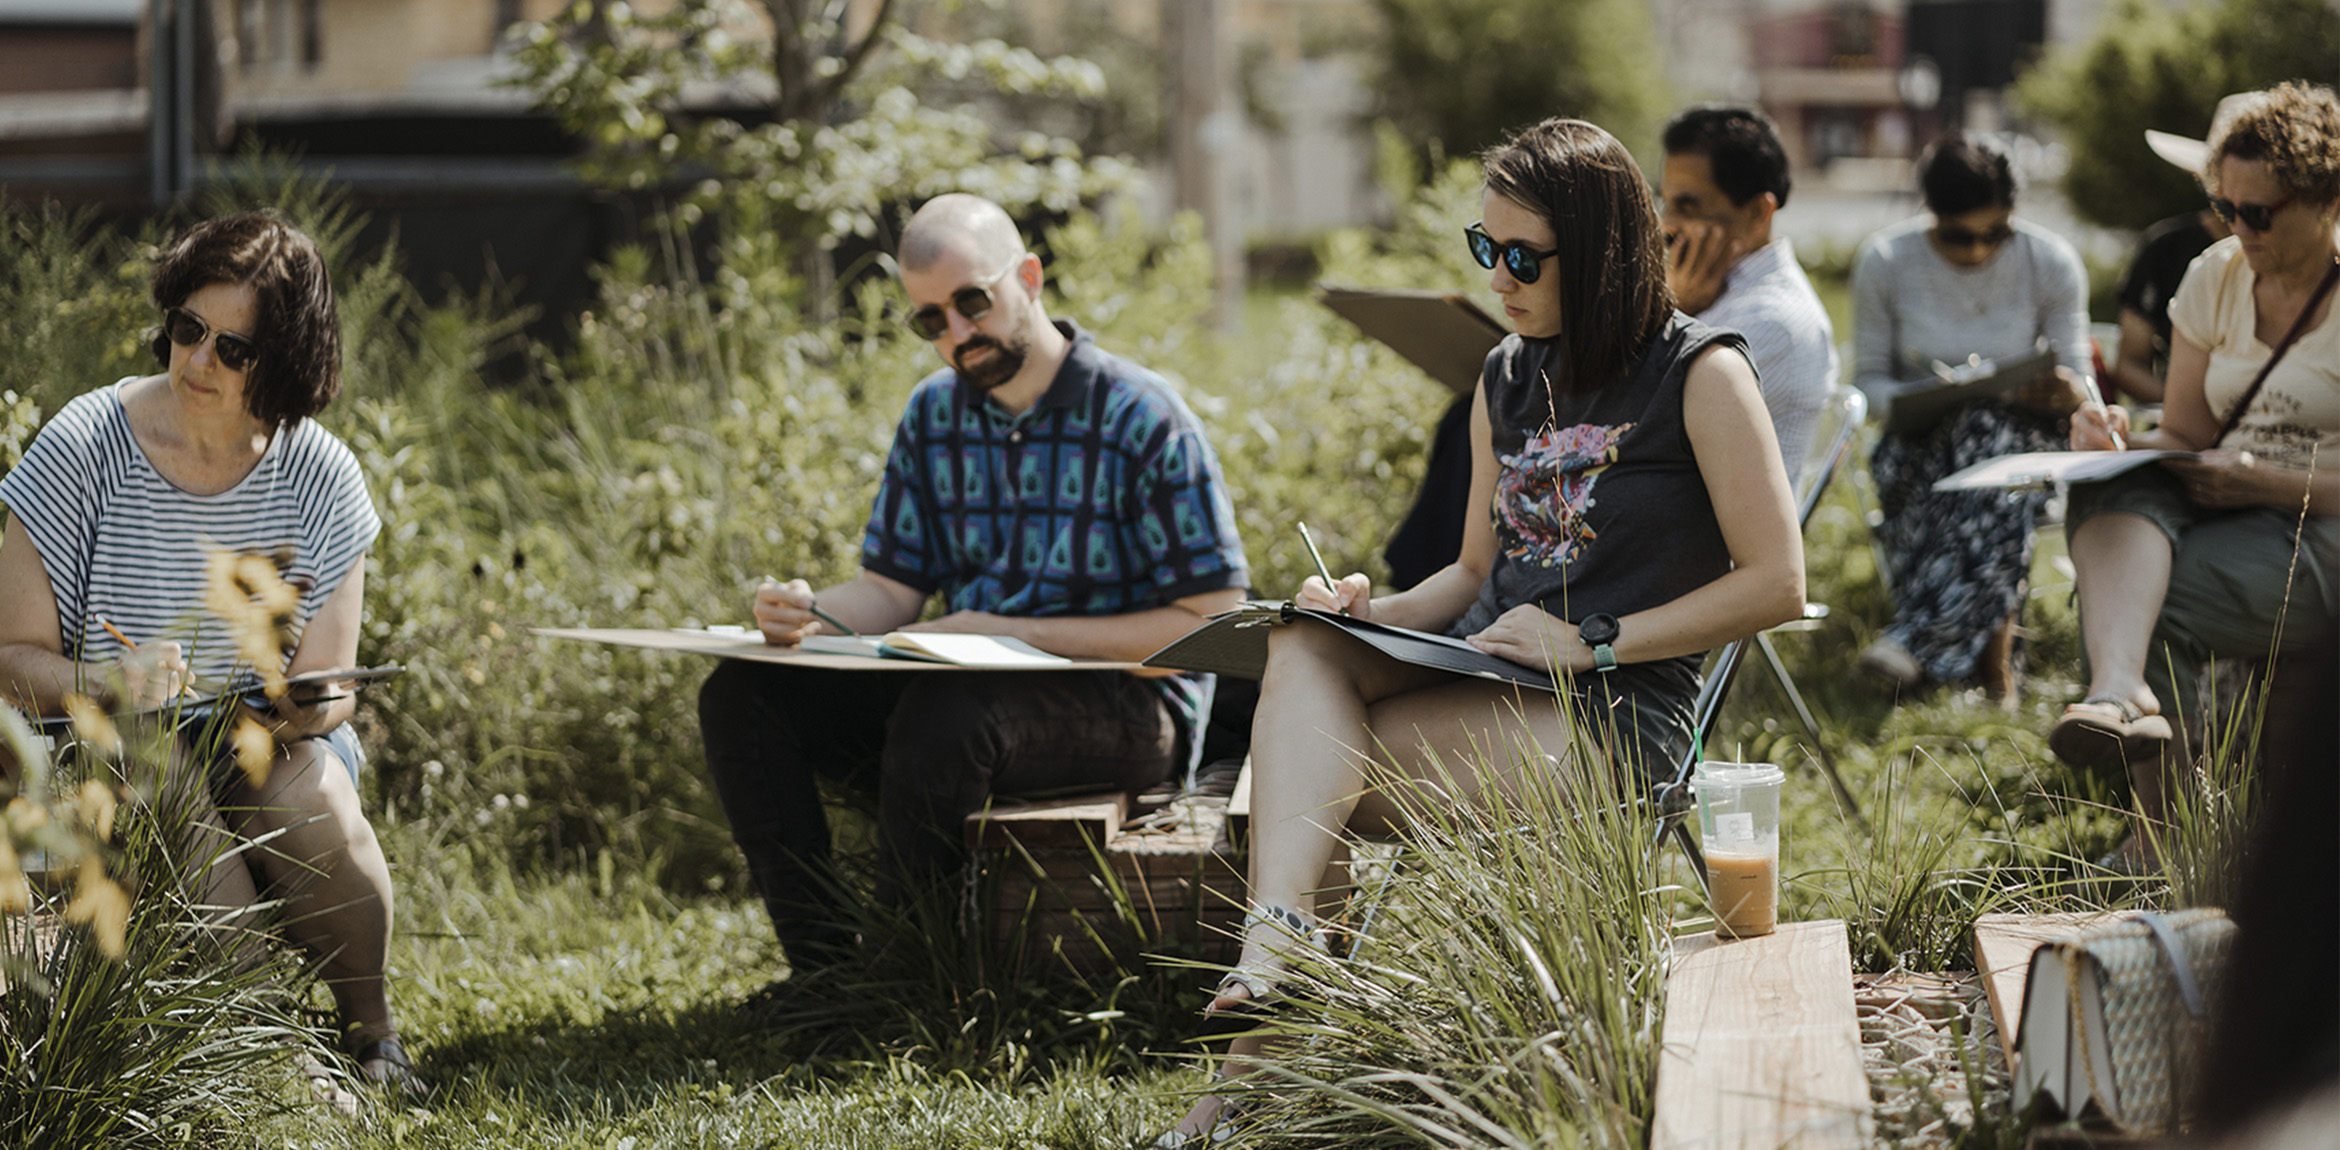 A group of people sitting on stools in a grassy park sketching and writing on large pads